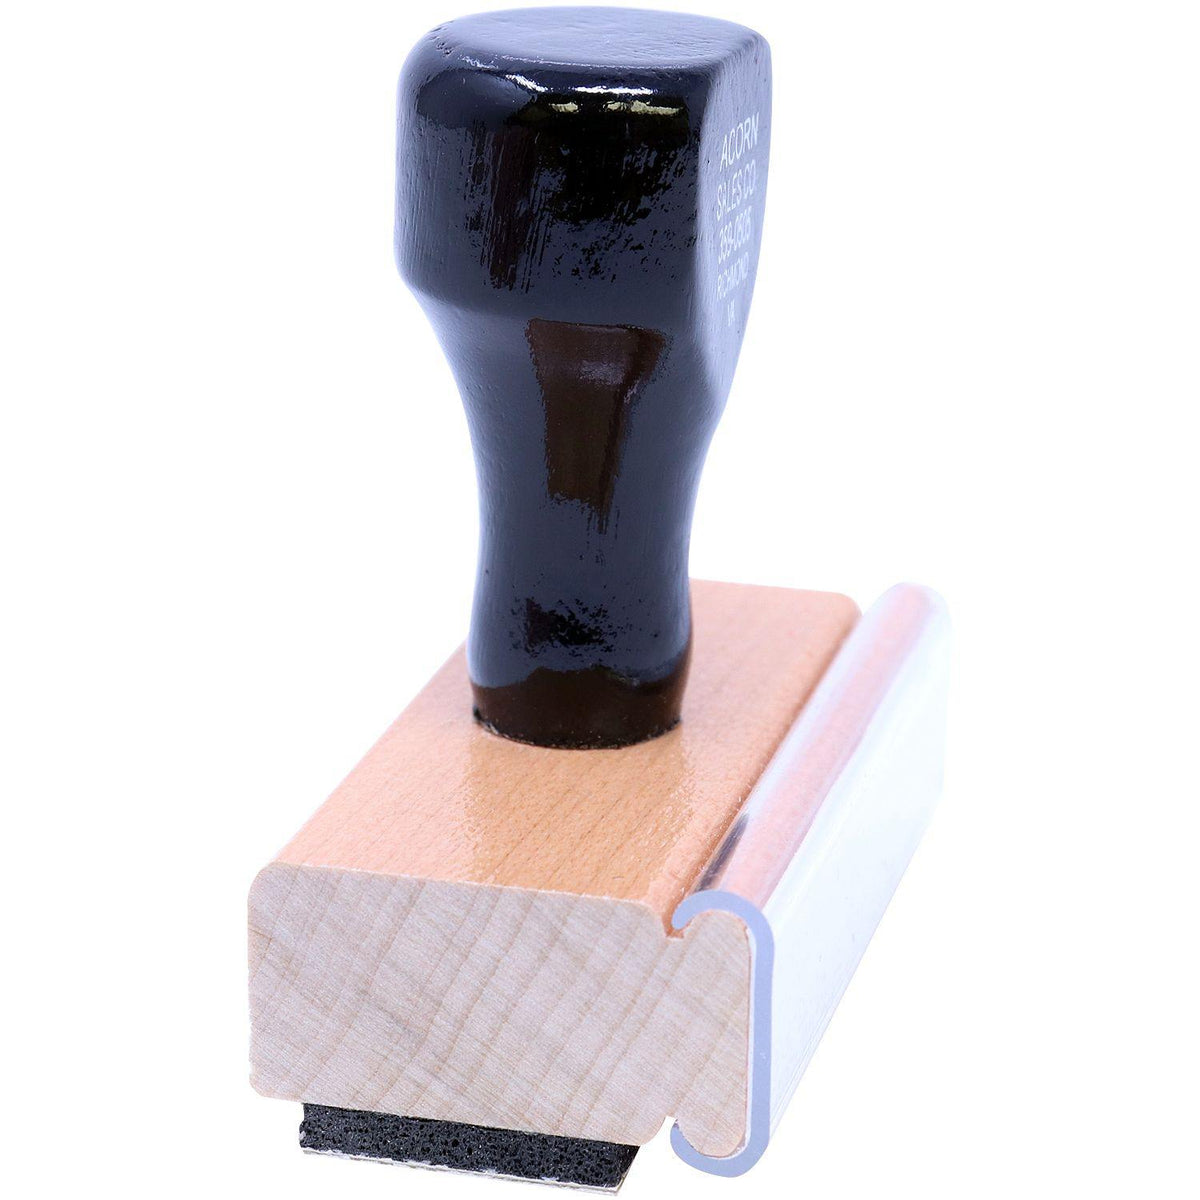 Side View of Trustee Exhibit Rubber Stamp at an Angle